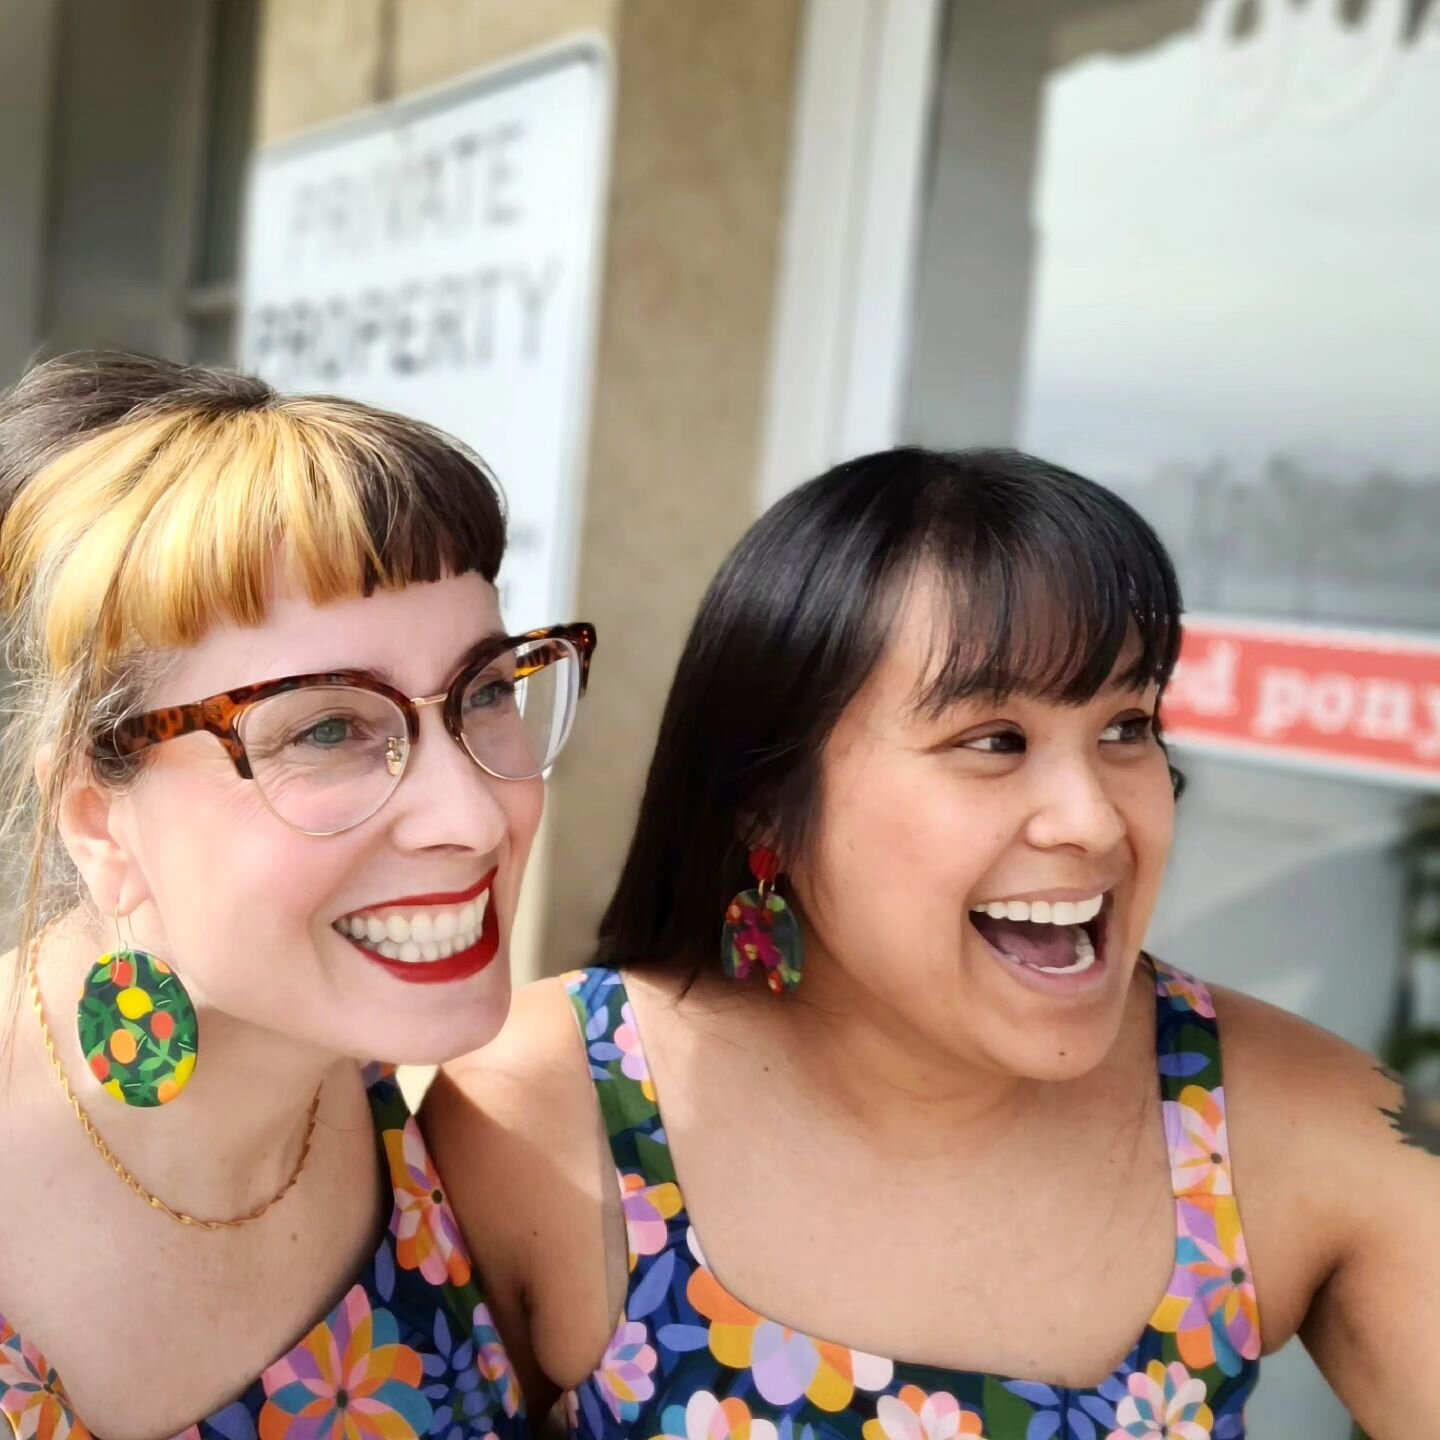 ~~Prairie Poly at Red Pony Saturday April 6, 10-1:00~~
Hurray! @prairiepolyyeg is having a Big Big Earring Pop-Up Sale this Saturday at Red Pony, with everything 40% off!! She's bringing only Big earrings (See what we did there? The Big *BIG* Earring